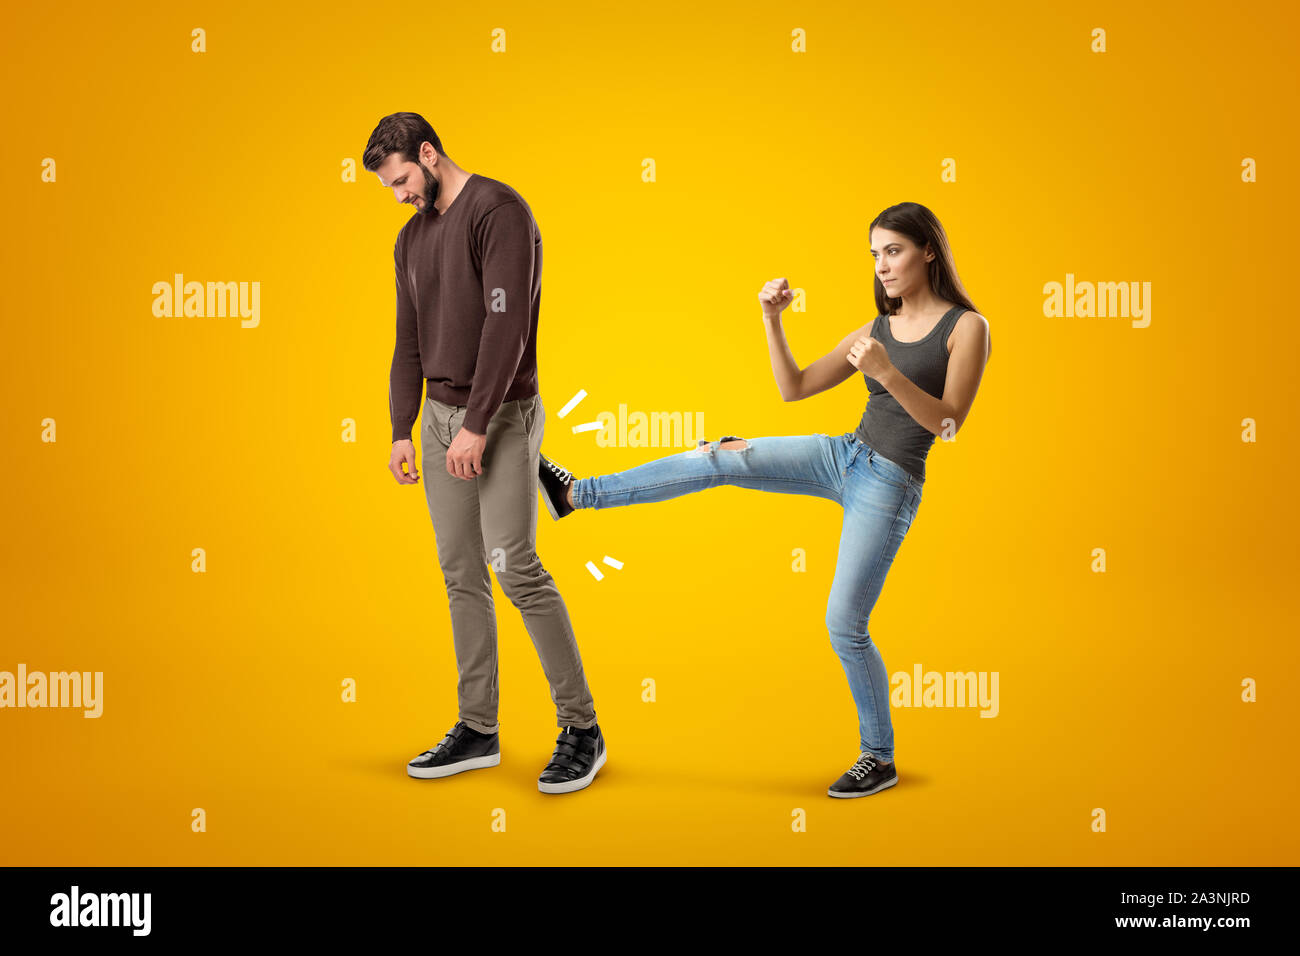 Young brunette girl wearing casual jeans and t-shirt kicking sad young man in casual clothes on yellow background Stock Photo